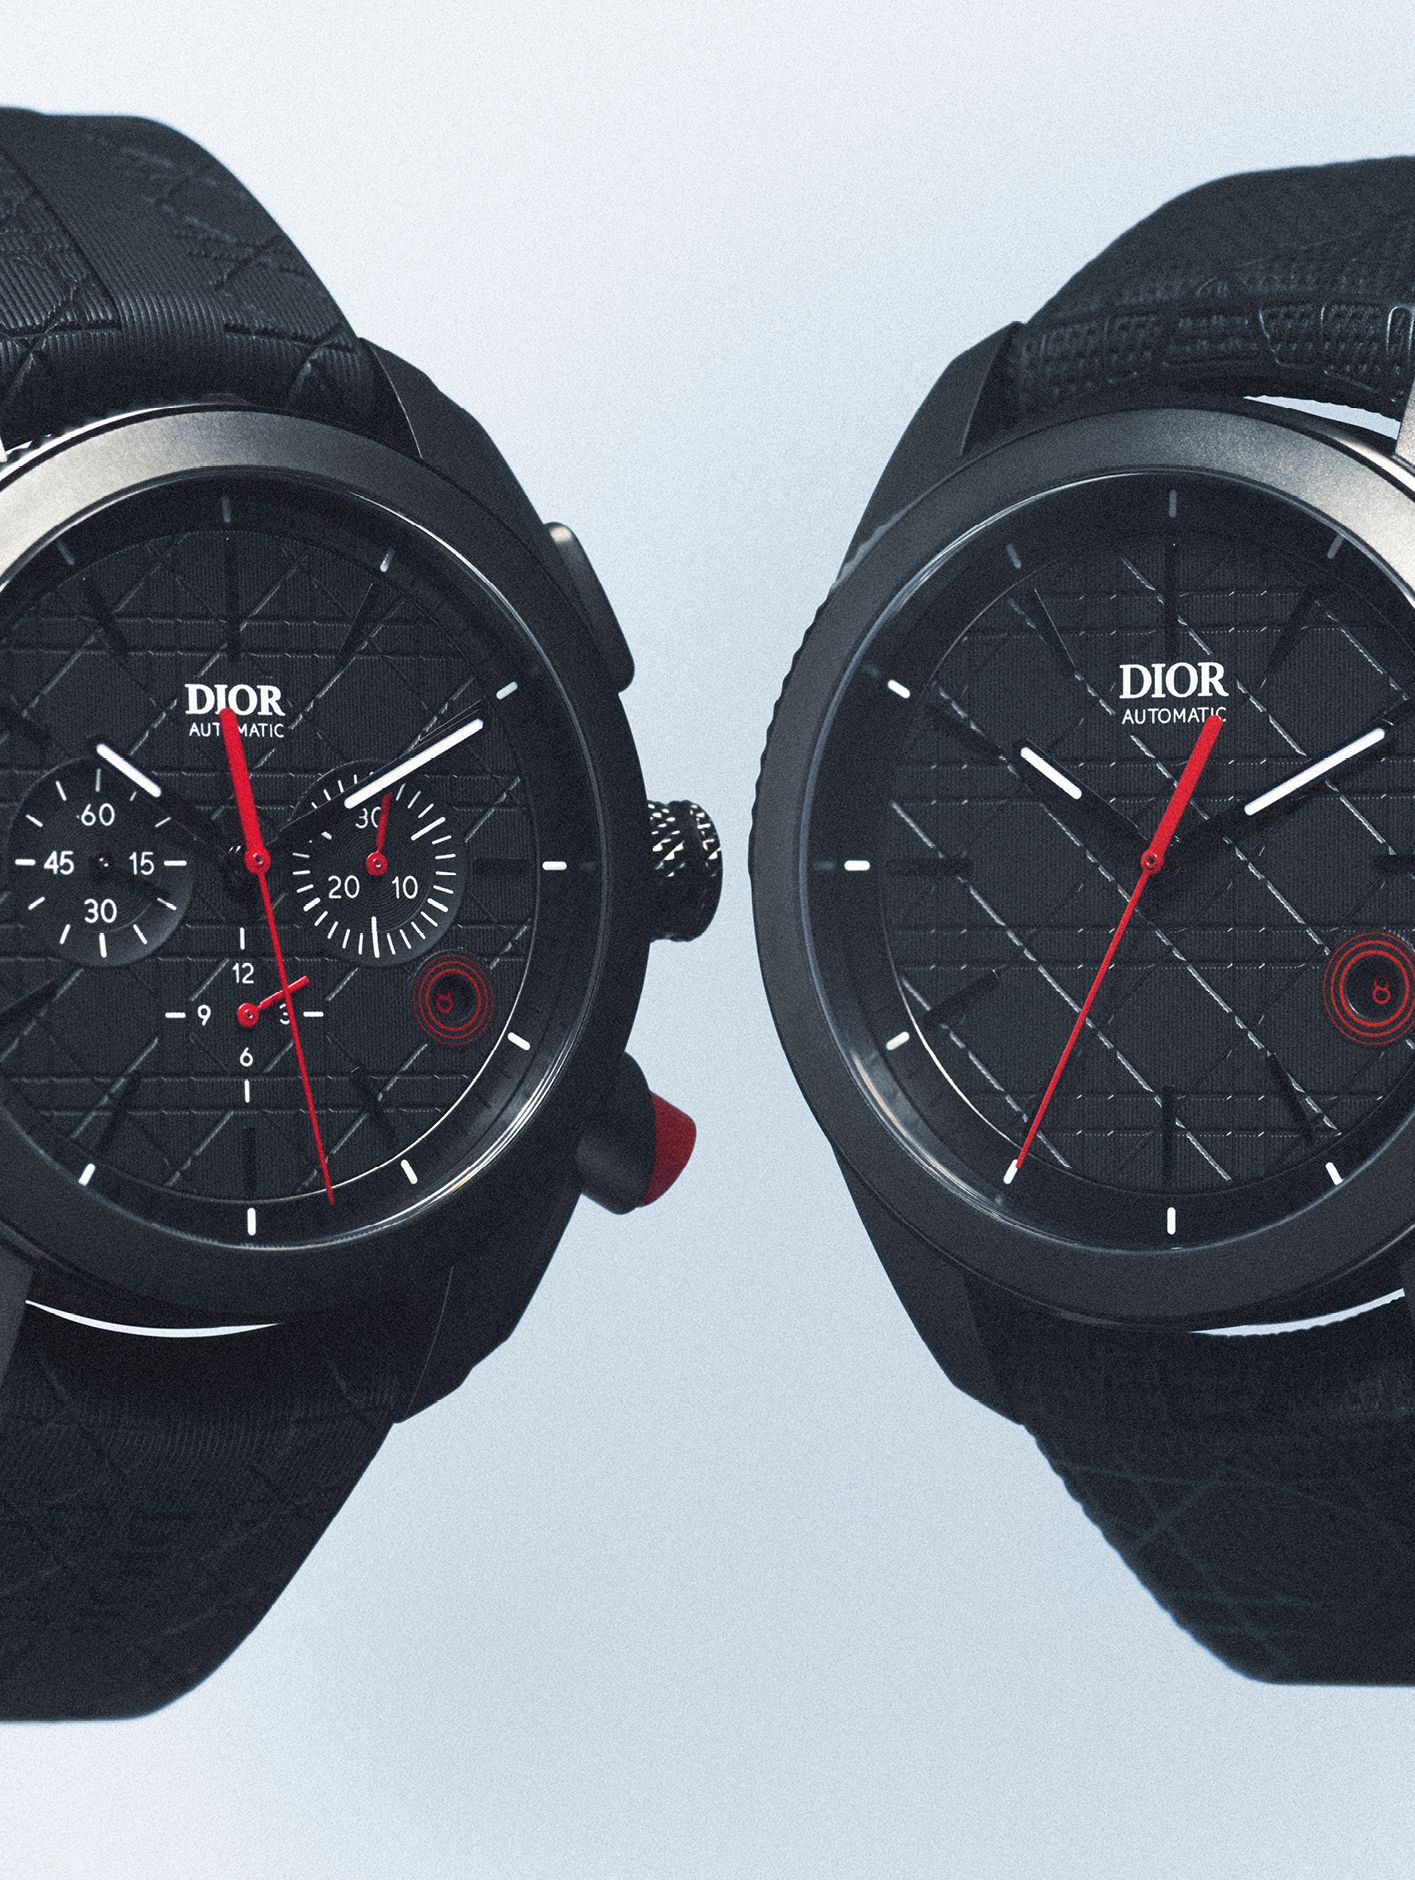 The newest iterations of Dior's Chiffre Rouge timepieces